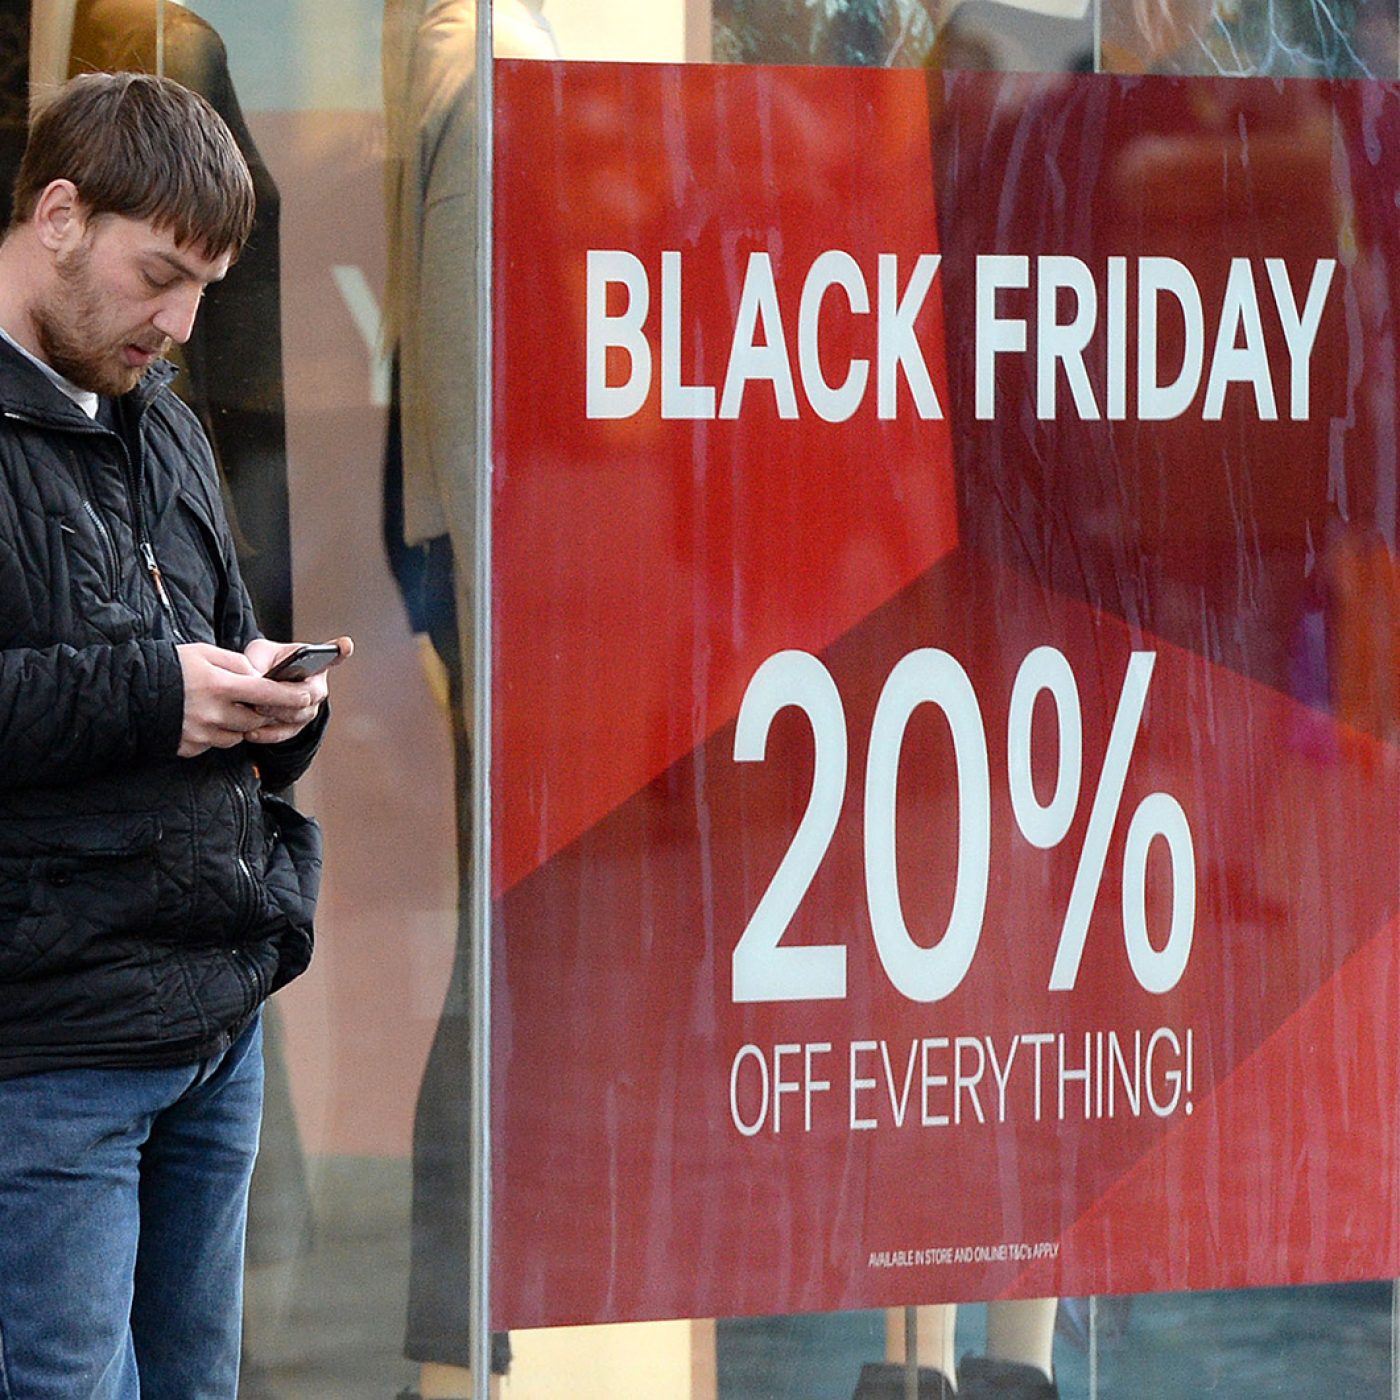 JCPenney Black Friday deals 2022 have already started